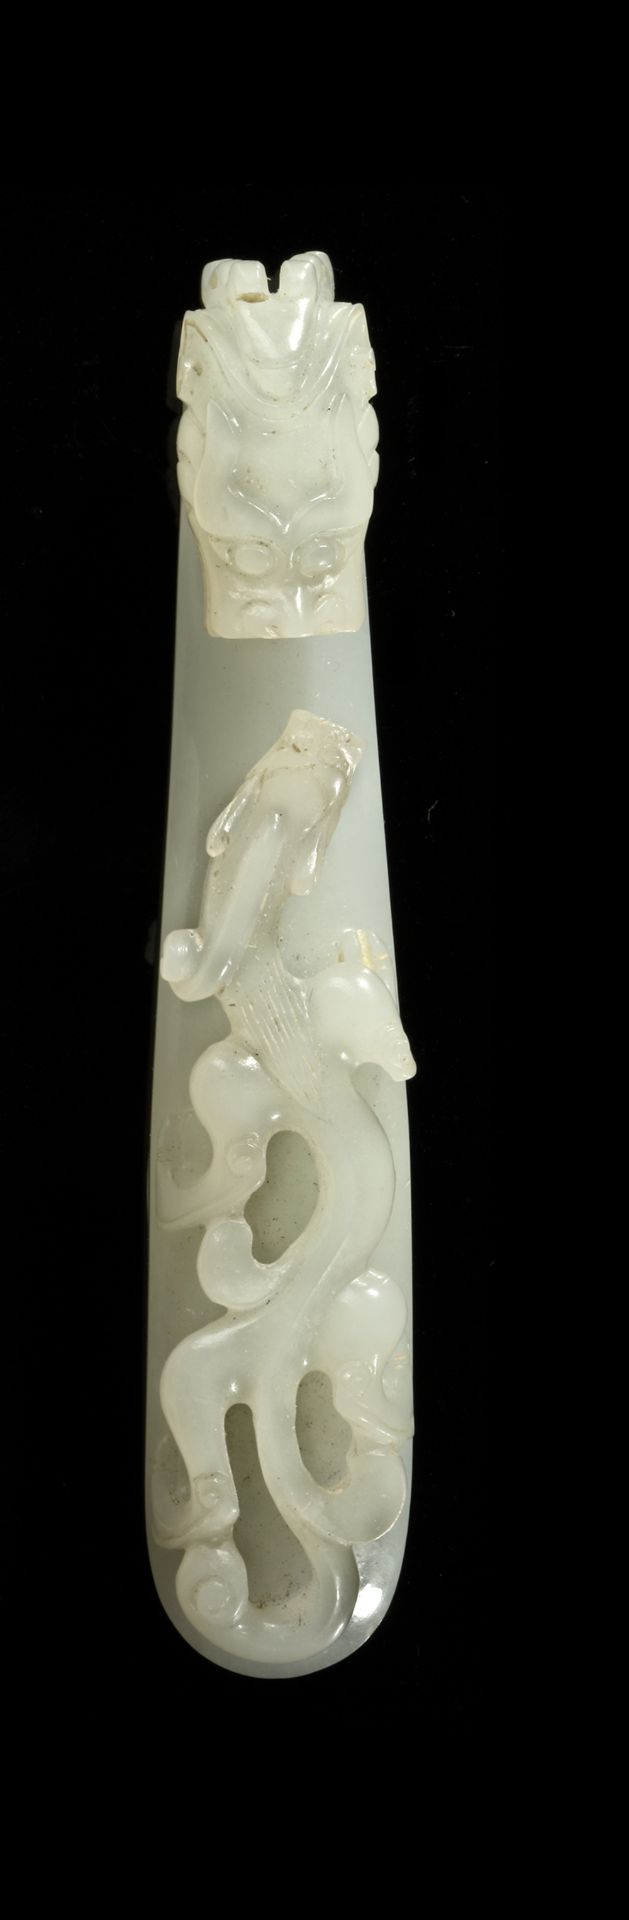 A CHINESE JADE BELT HOOK, 19TH-20TH CENTURY - Image 4 of 6